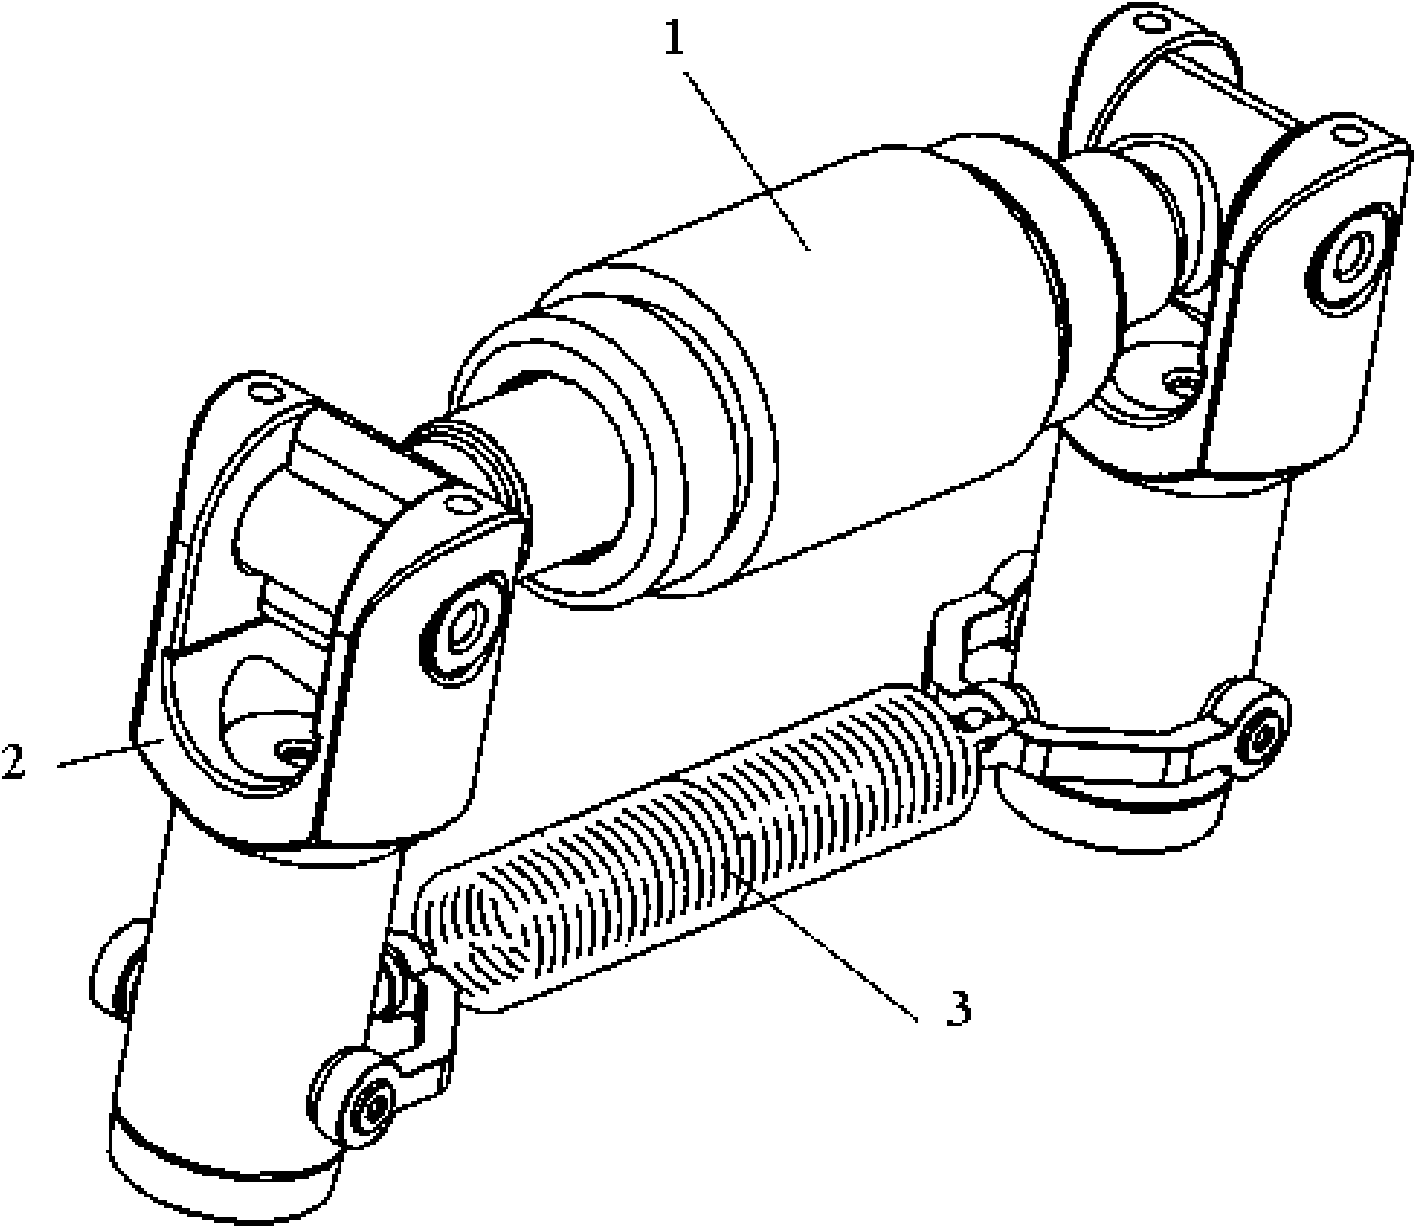 Combined hinge with double rotation freedom degrees